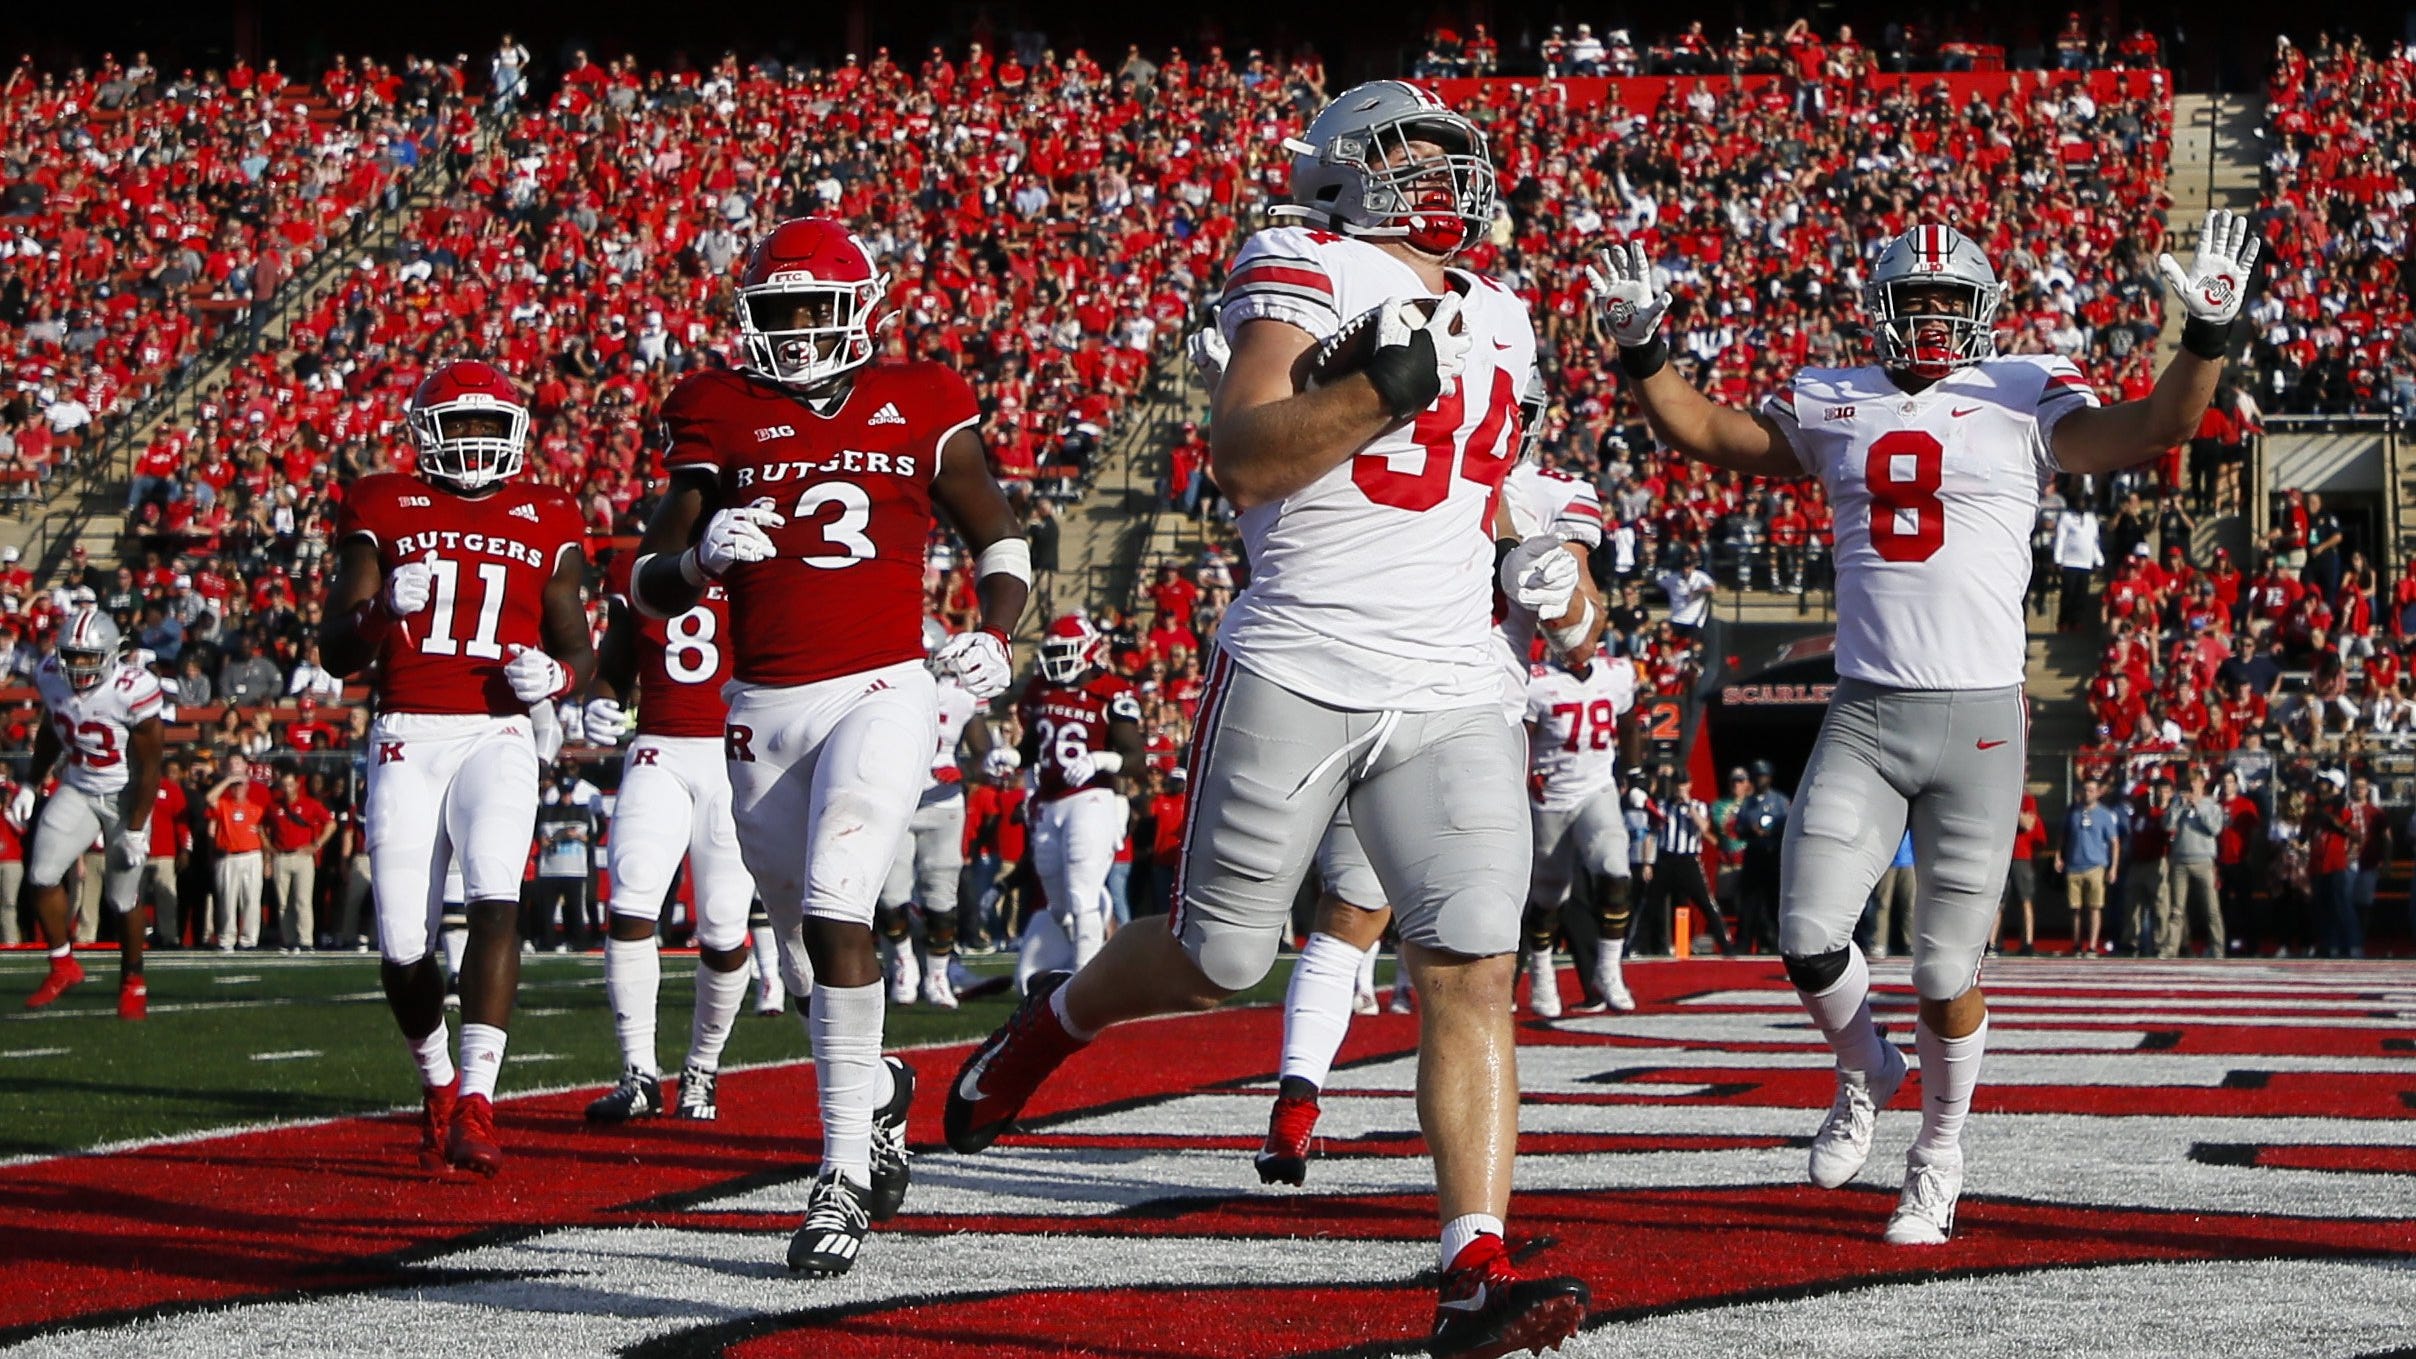 How To Watch, Stream Ohio State Football Play Maryland On Tv